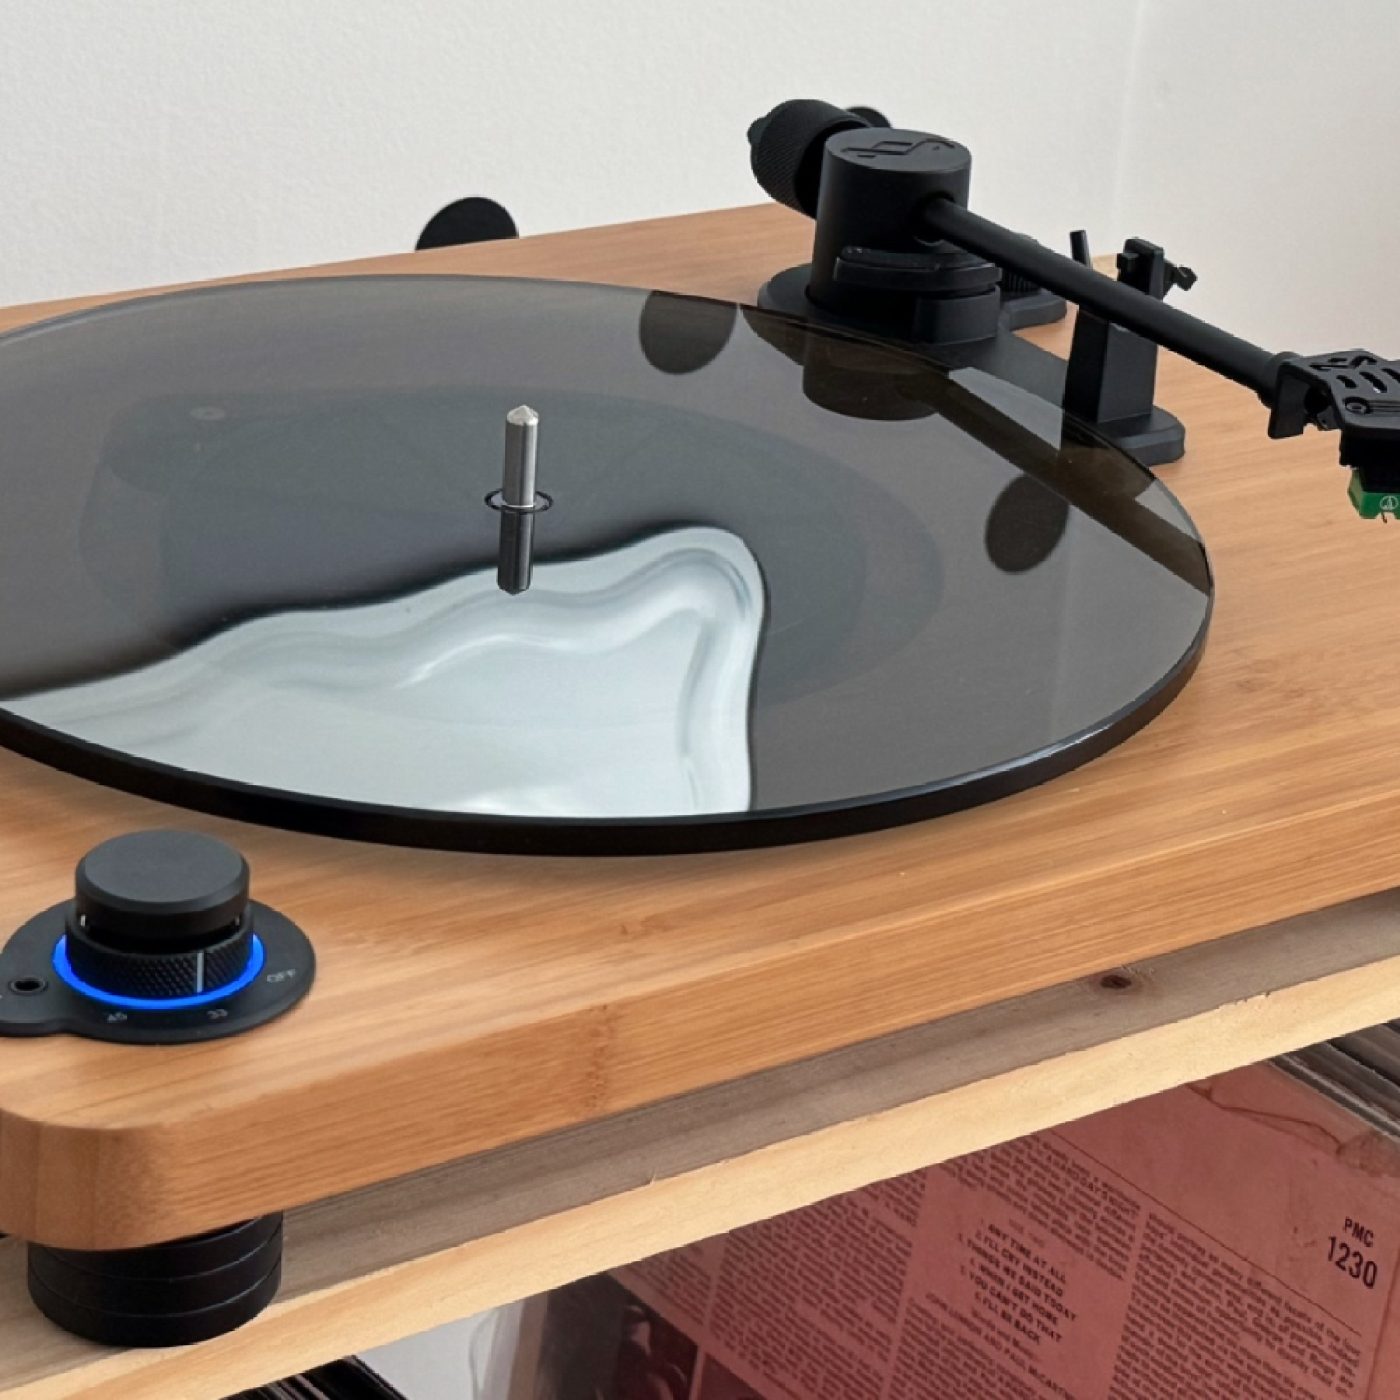 House of Marley Stir it Up Lux Bluetooth Turntable